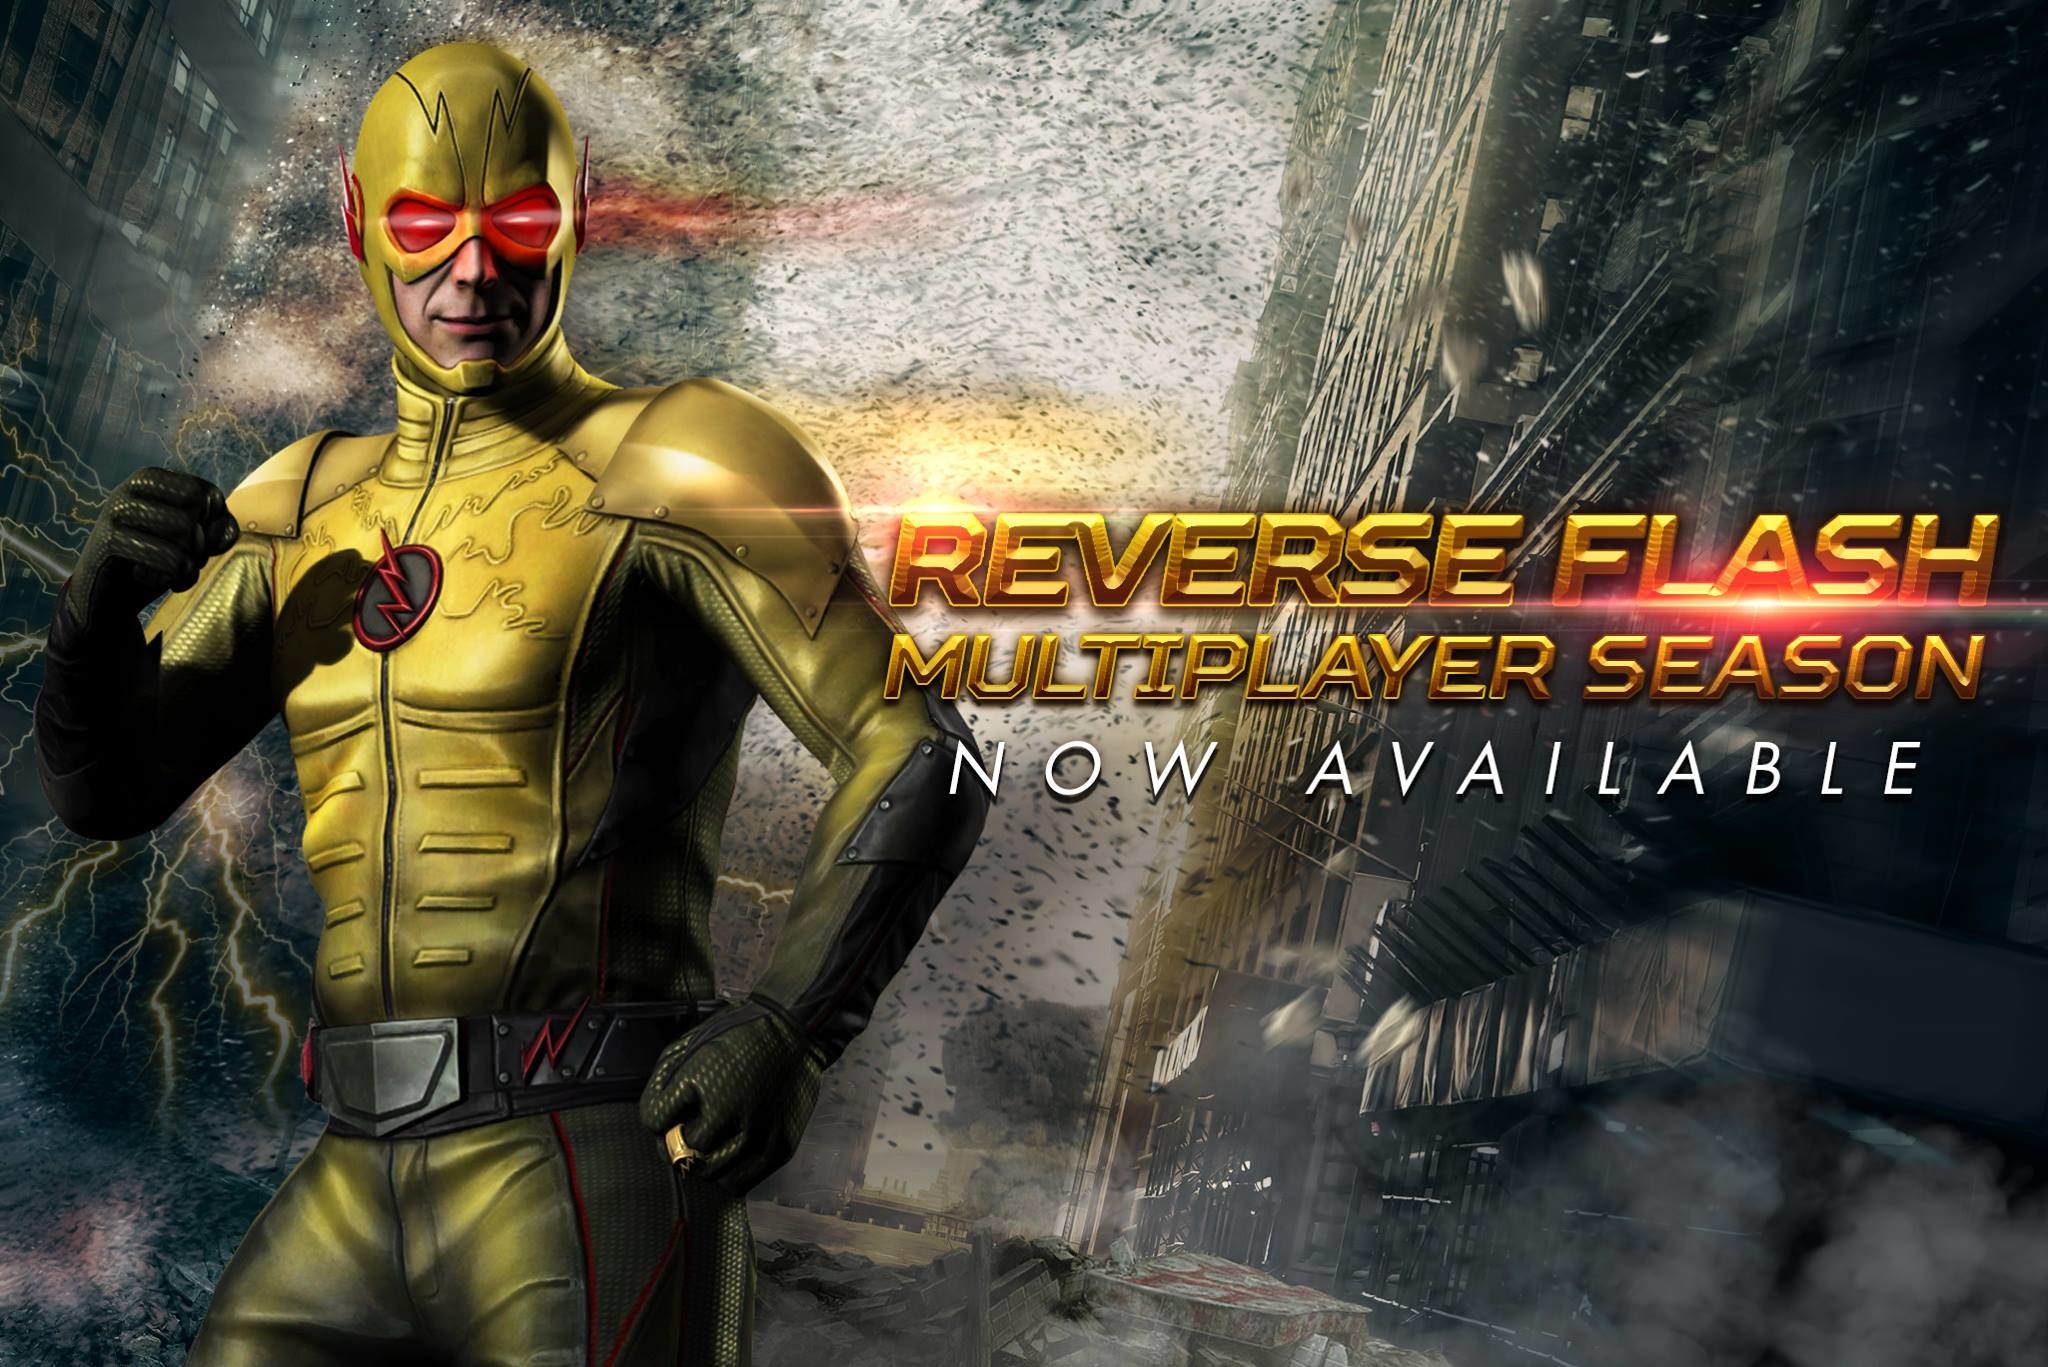 2048x1367 Reverse Flash Online Challenge Available On Injustice Mobile